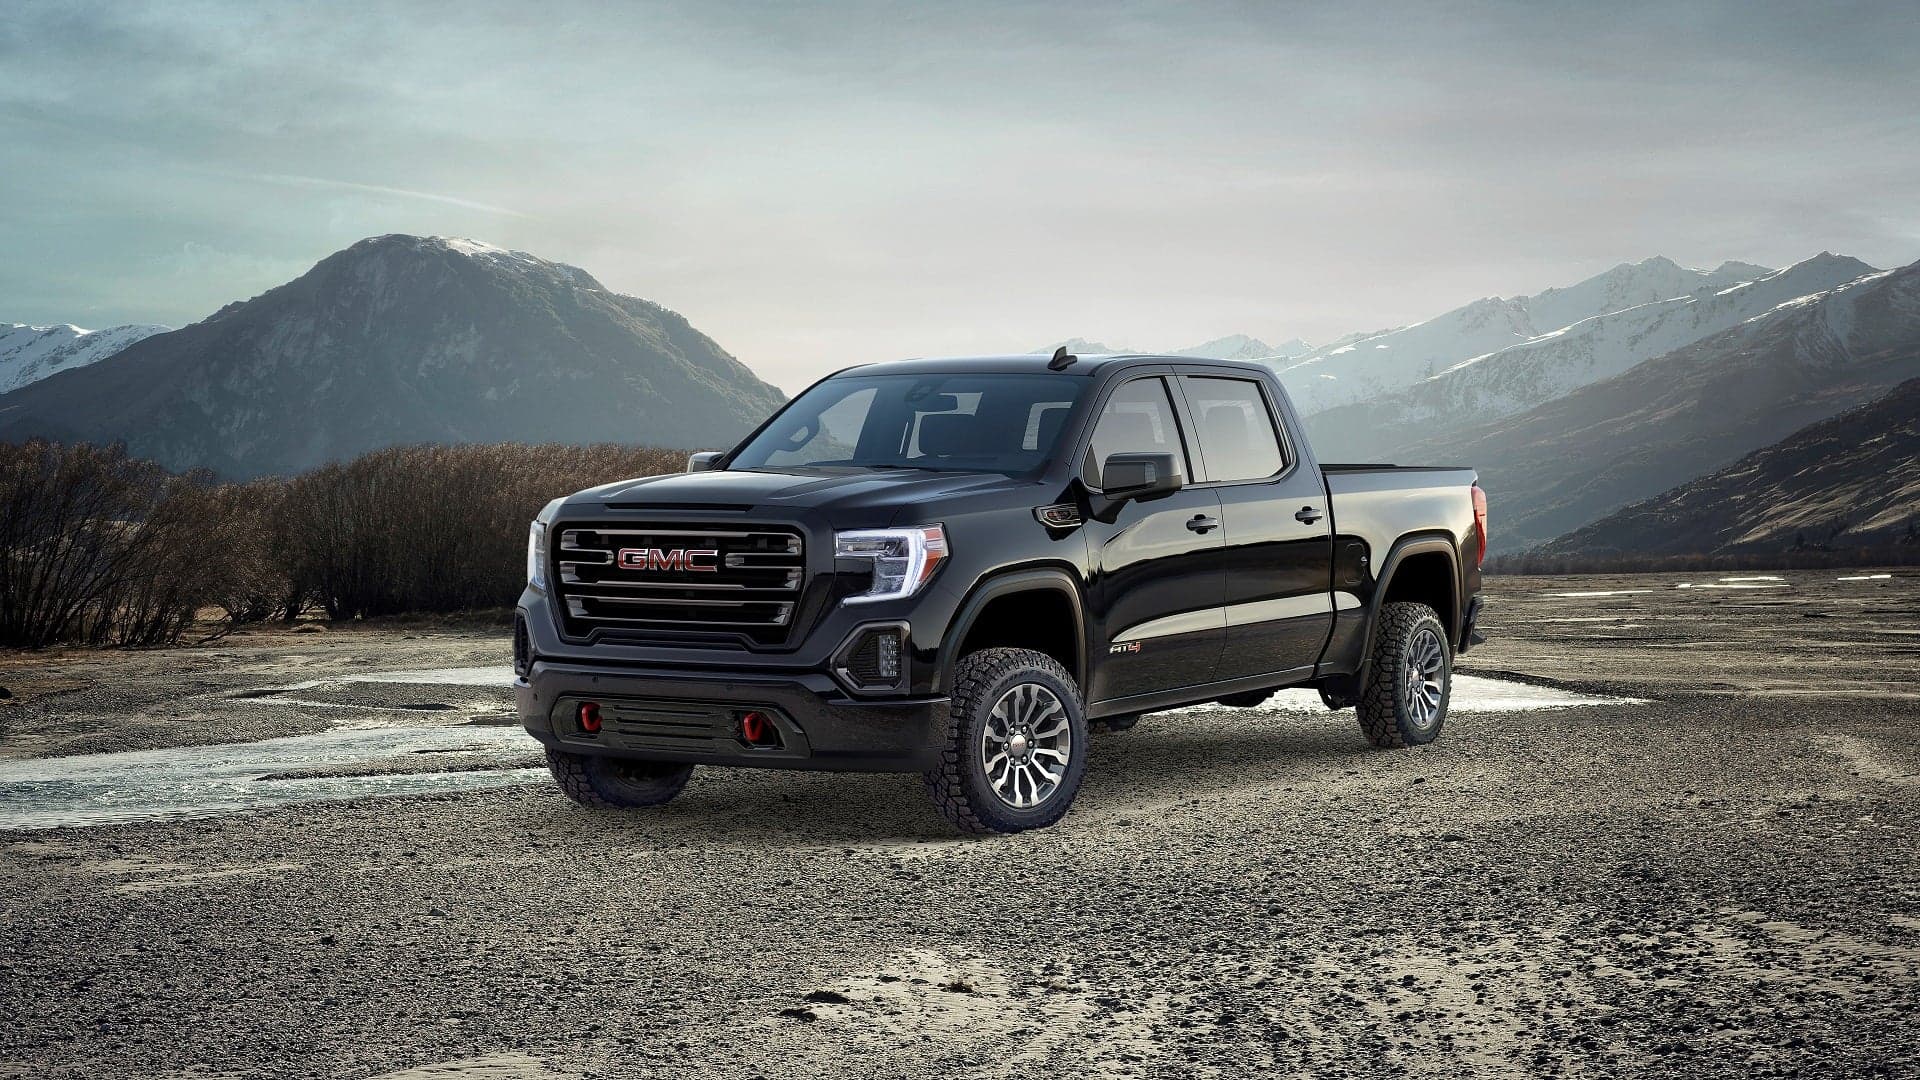 GMC Introduces New Off-Road Sub-Brand with 2019 Sierra AT4